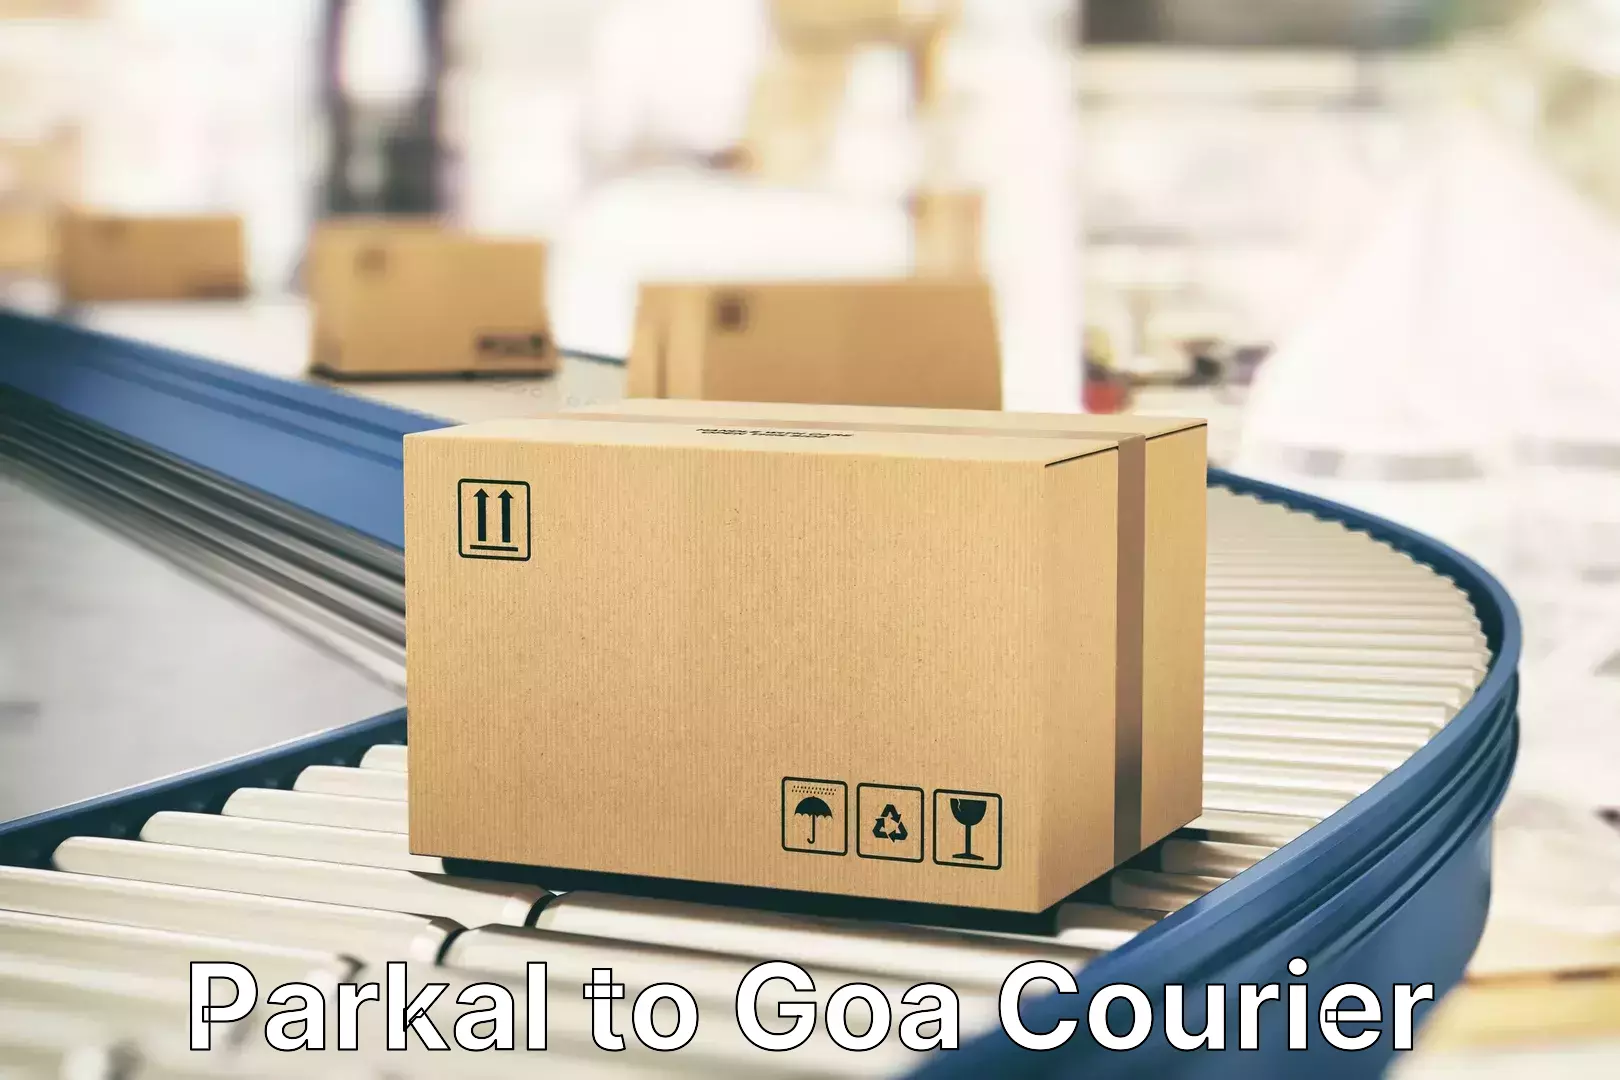 Luggage delivery app Parkal to Goa